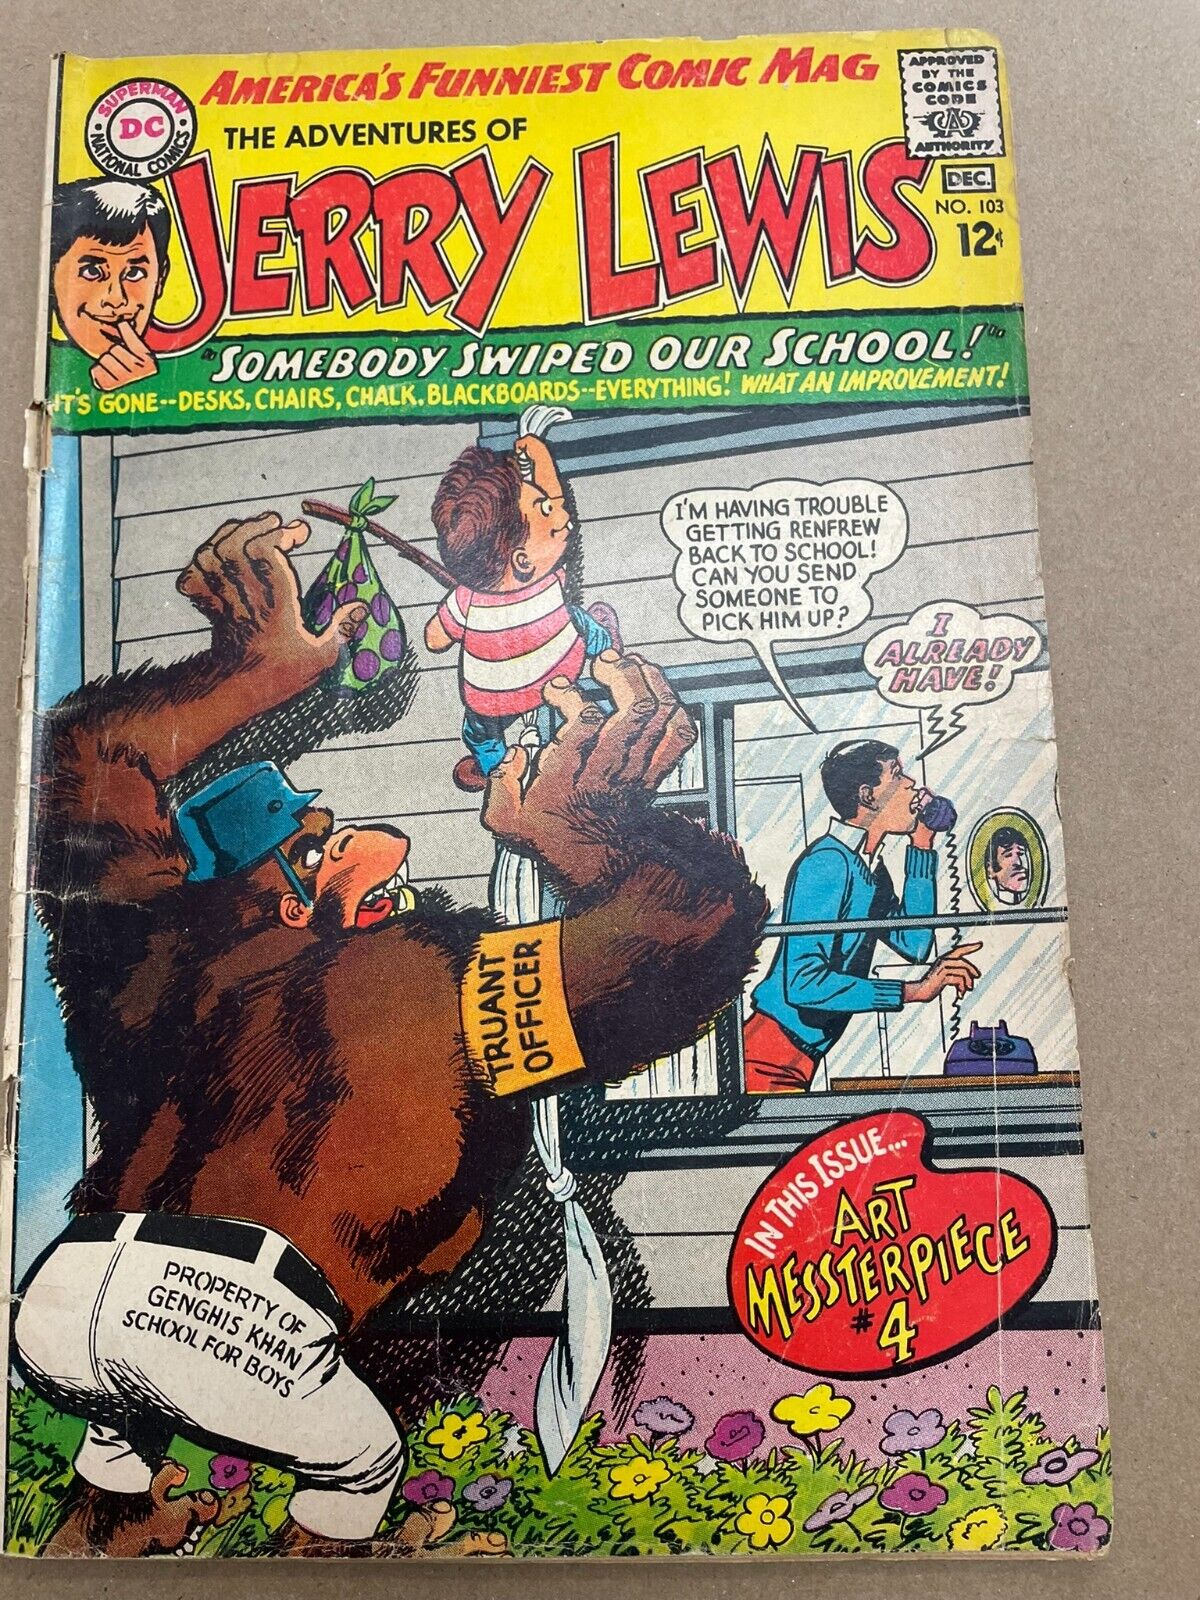 The Adventures of Jerry Lewis #103 (DC Comics Silver Age 1967) **RARE**